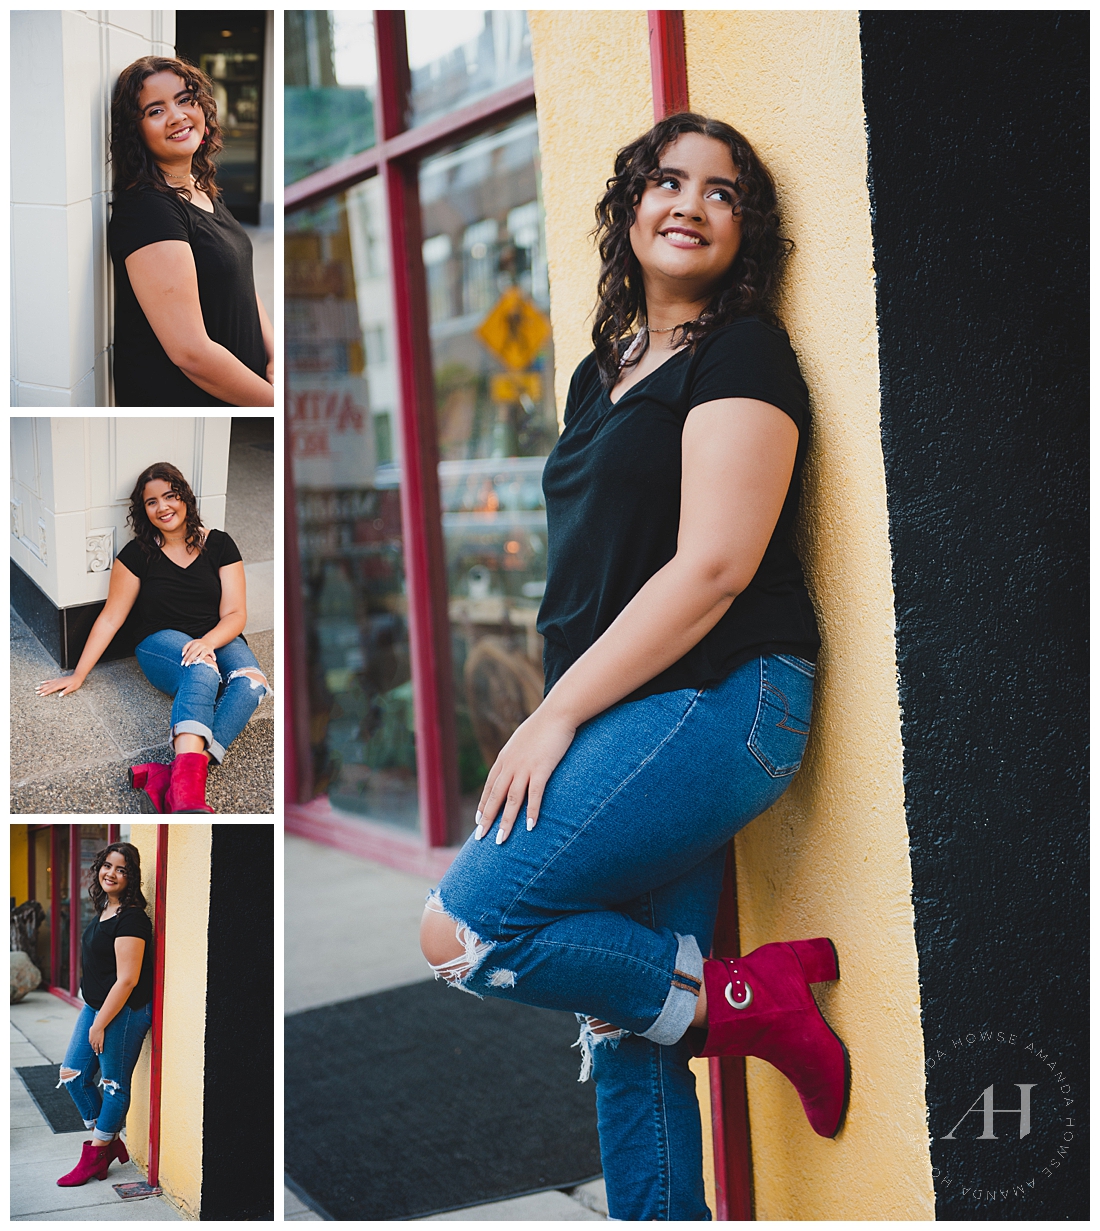 Fun Senior Portraits | How to Style Jeans and Booties for Senior Portraits, Red Boots, Casual Outfit Inspiration, Glam Hair and Makeup for Senior Portraits, Tacoma Locations | Photographed by the Best Tacoma Senior Portrait Photographer Amanda Howse